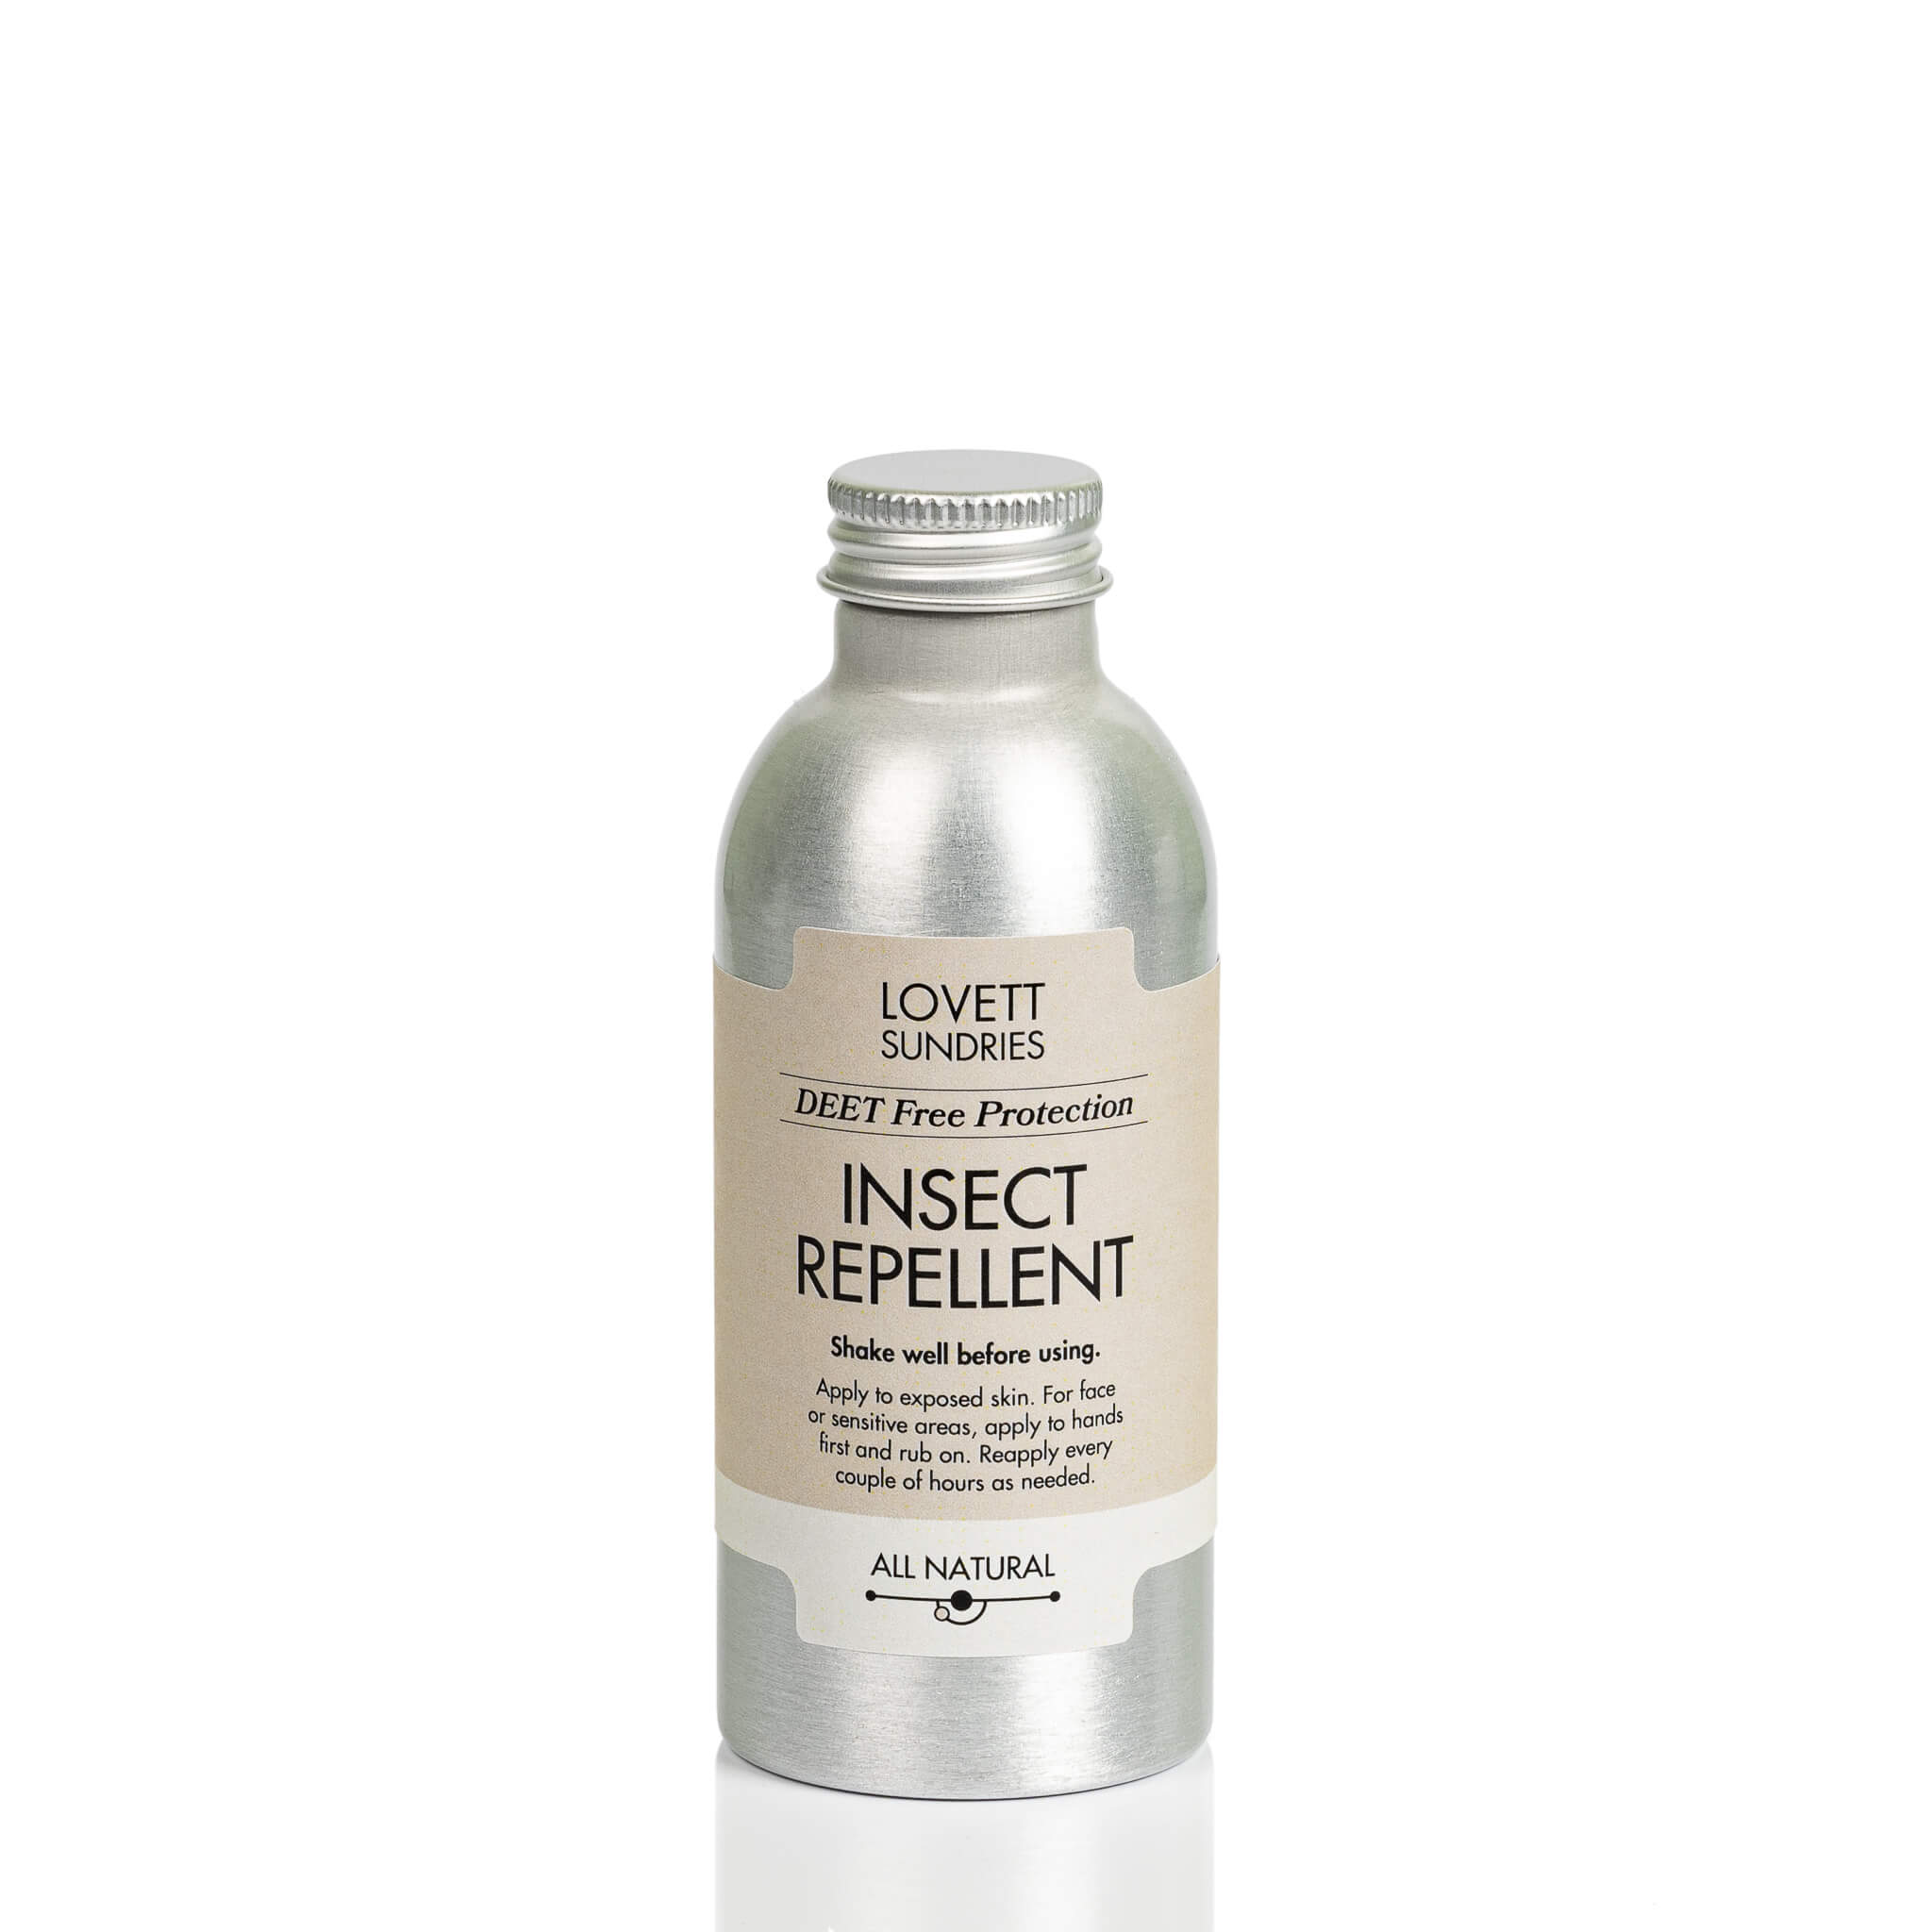 All natural deet free insect repellent in a recyclable aluminum bottle with a refill cap. 